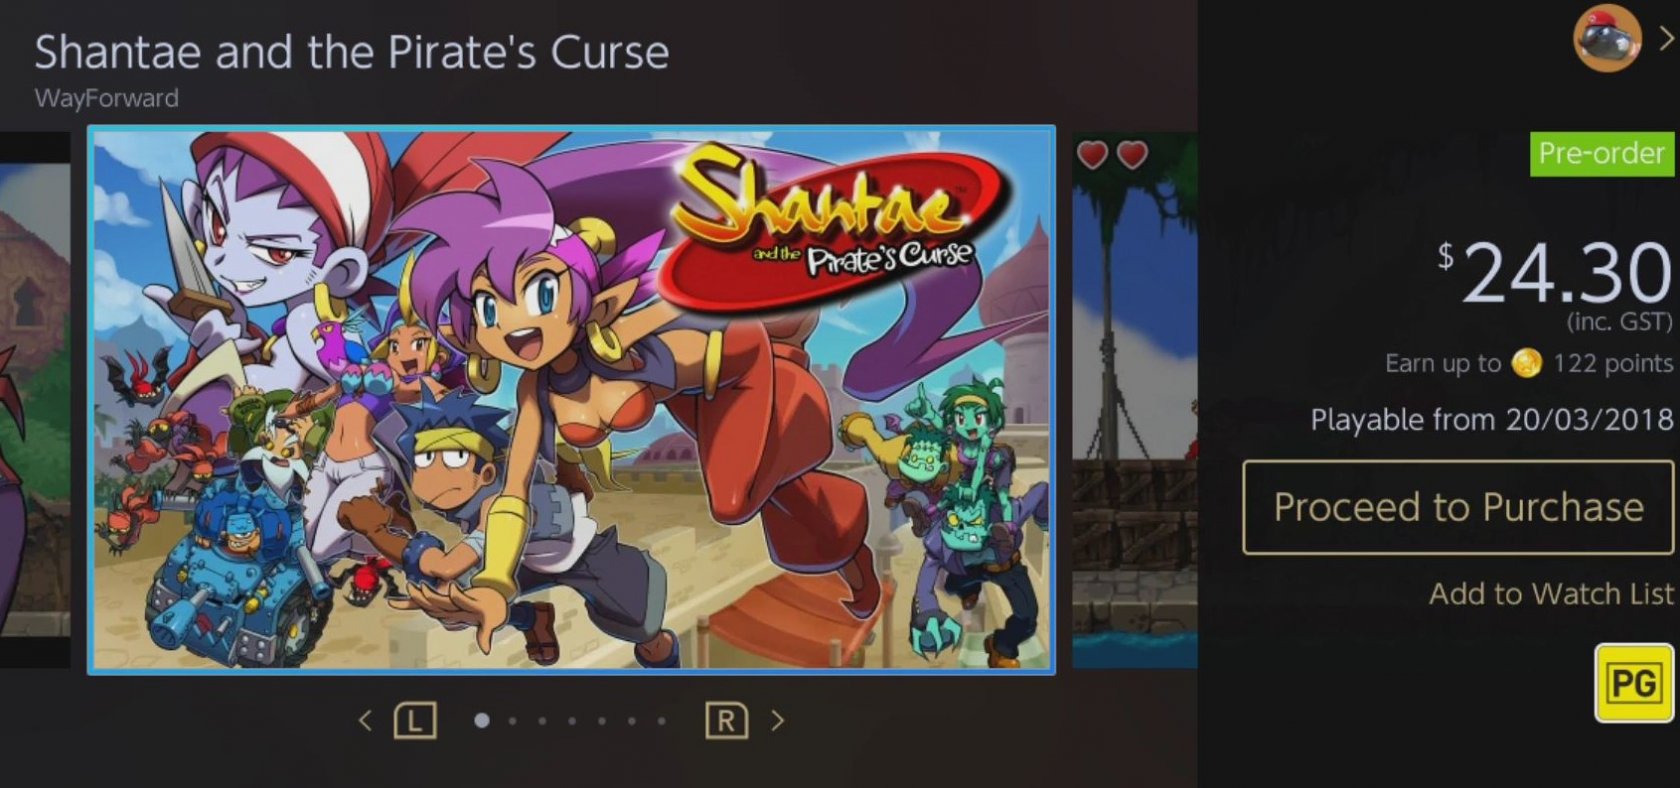 https://www.gamelegends.it/wp-content/uploads/2018/03/shantae-and-the-pirate-s-curse_notizia.jpg